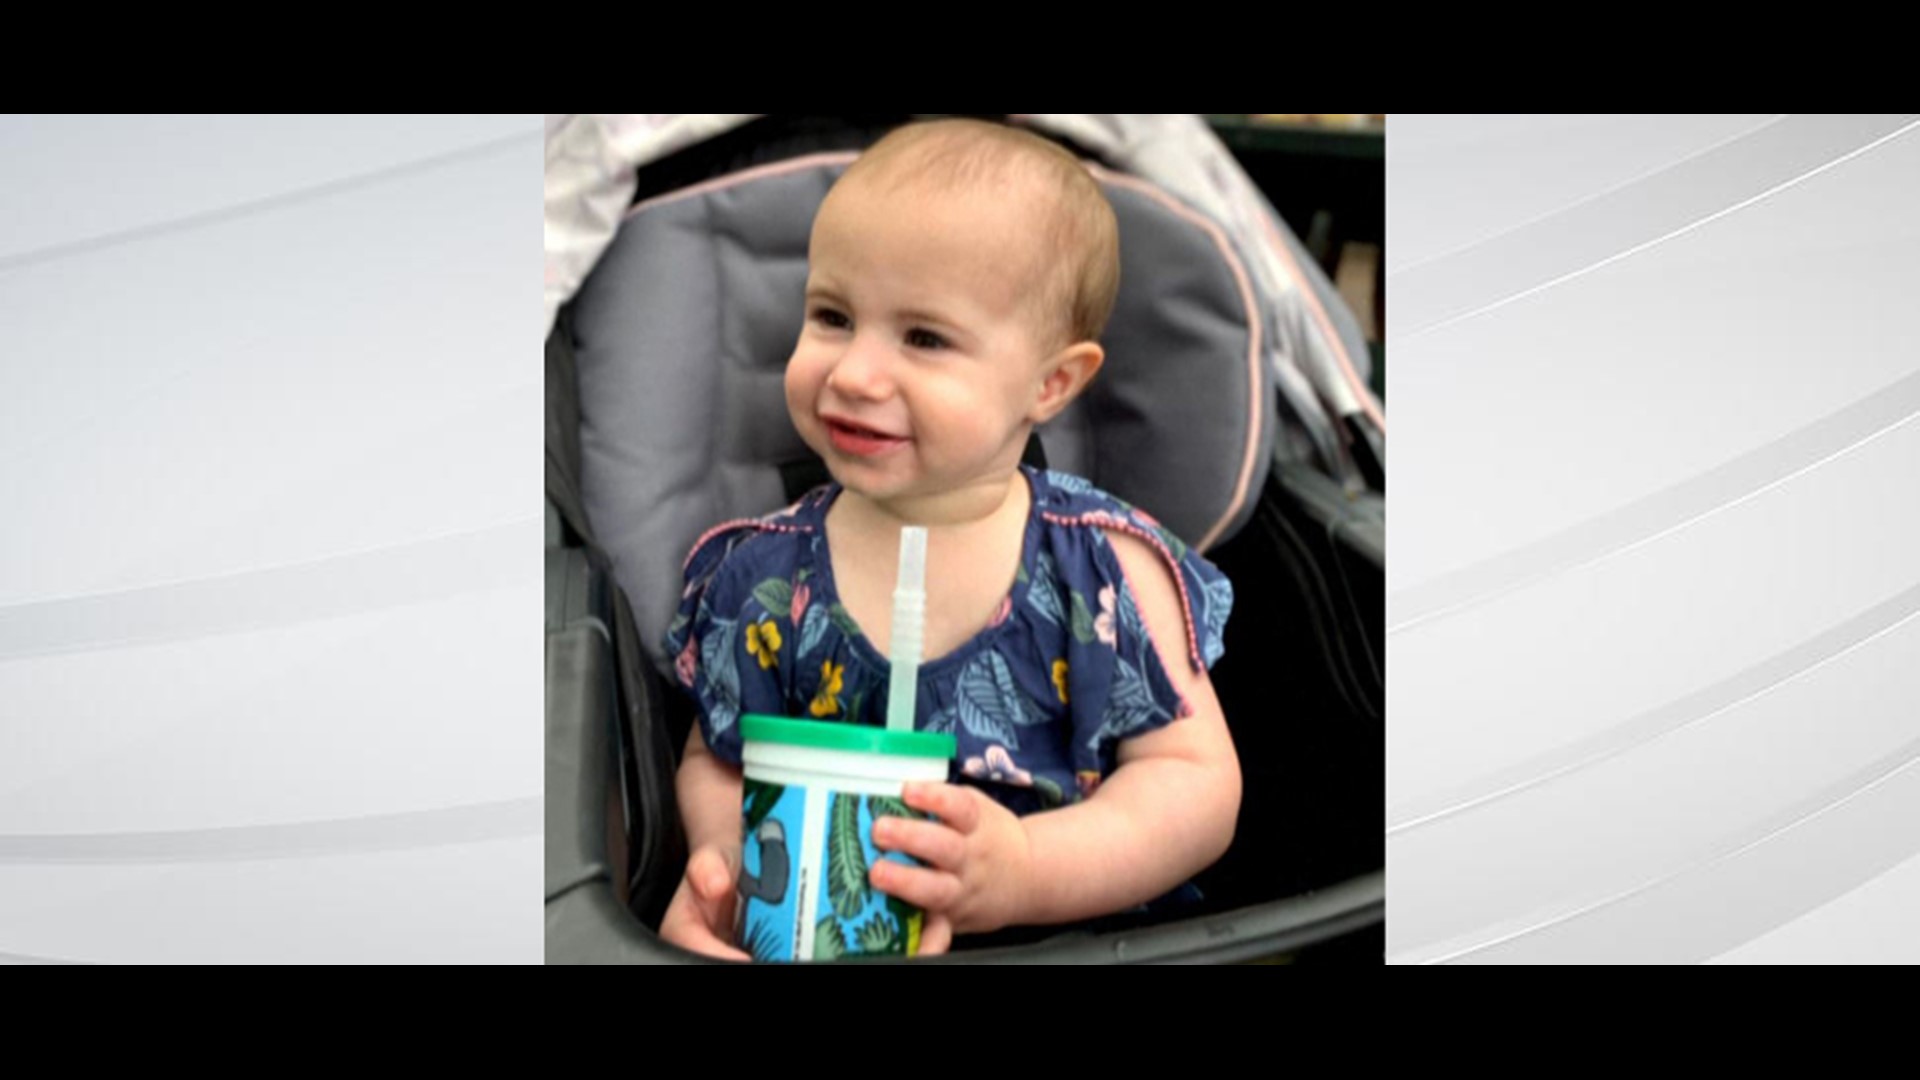 Chloe Wiegand's grandfather has pleaded guilty to negligent homicide in the toddler's death on a cruise ship in 2019.